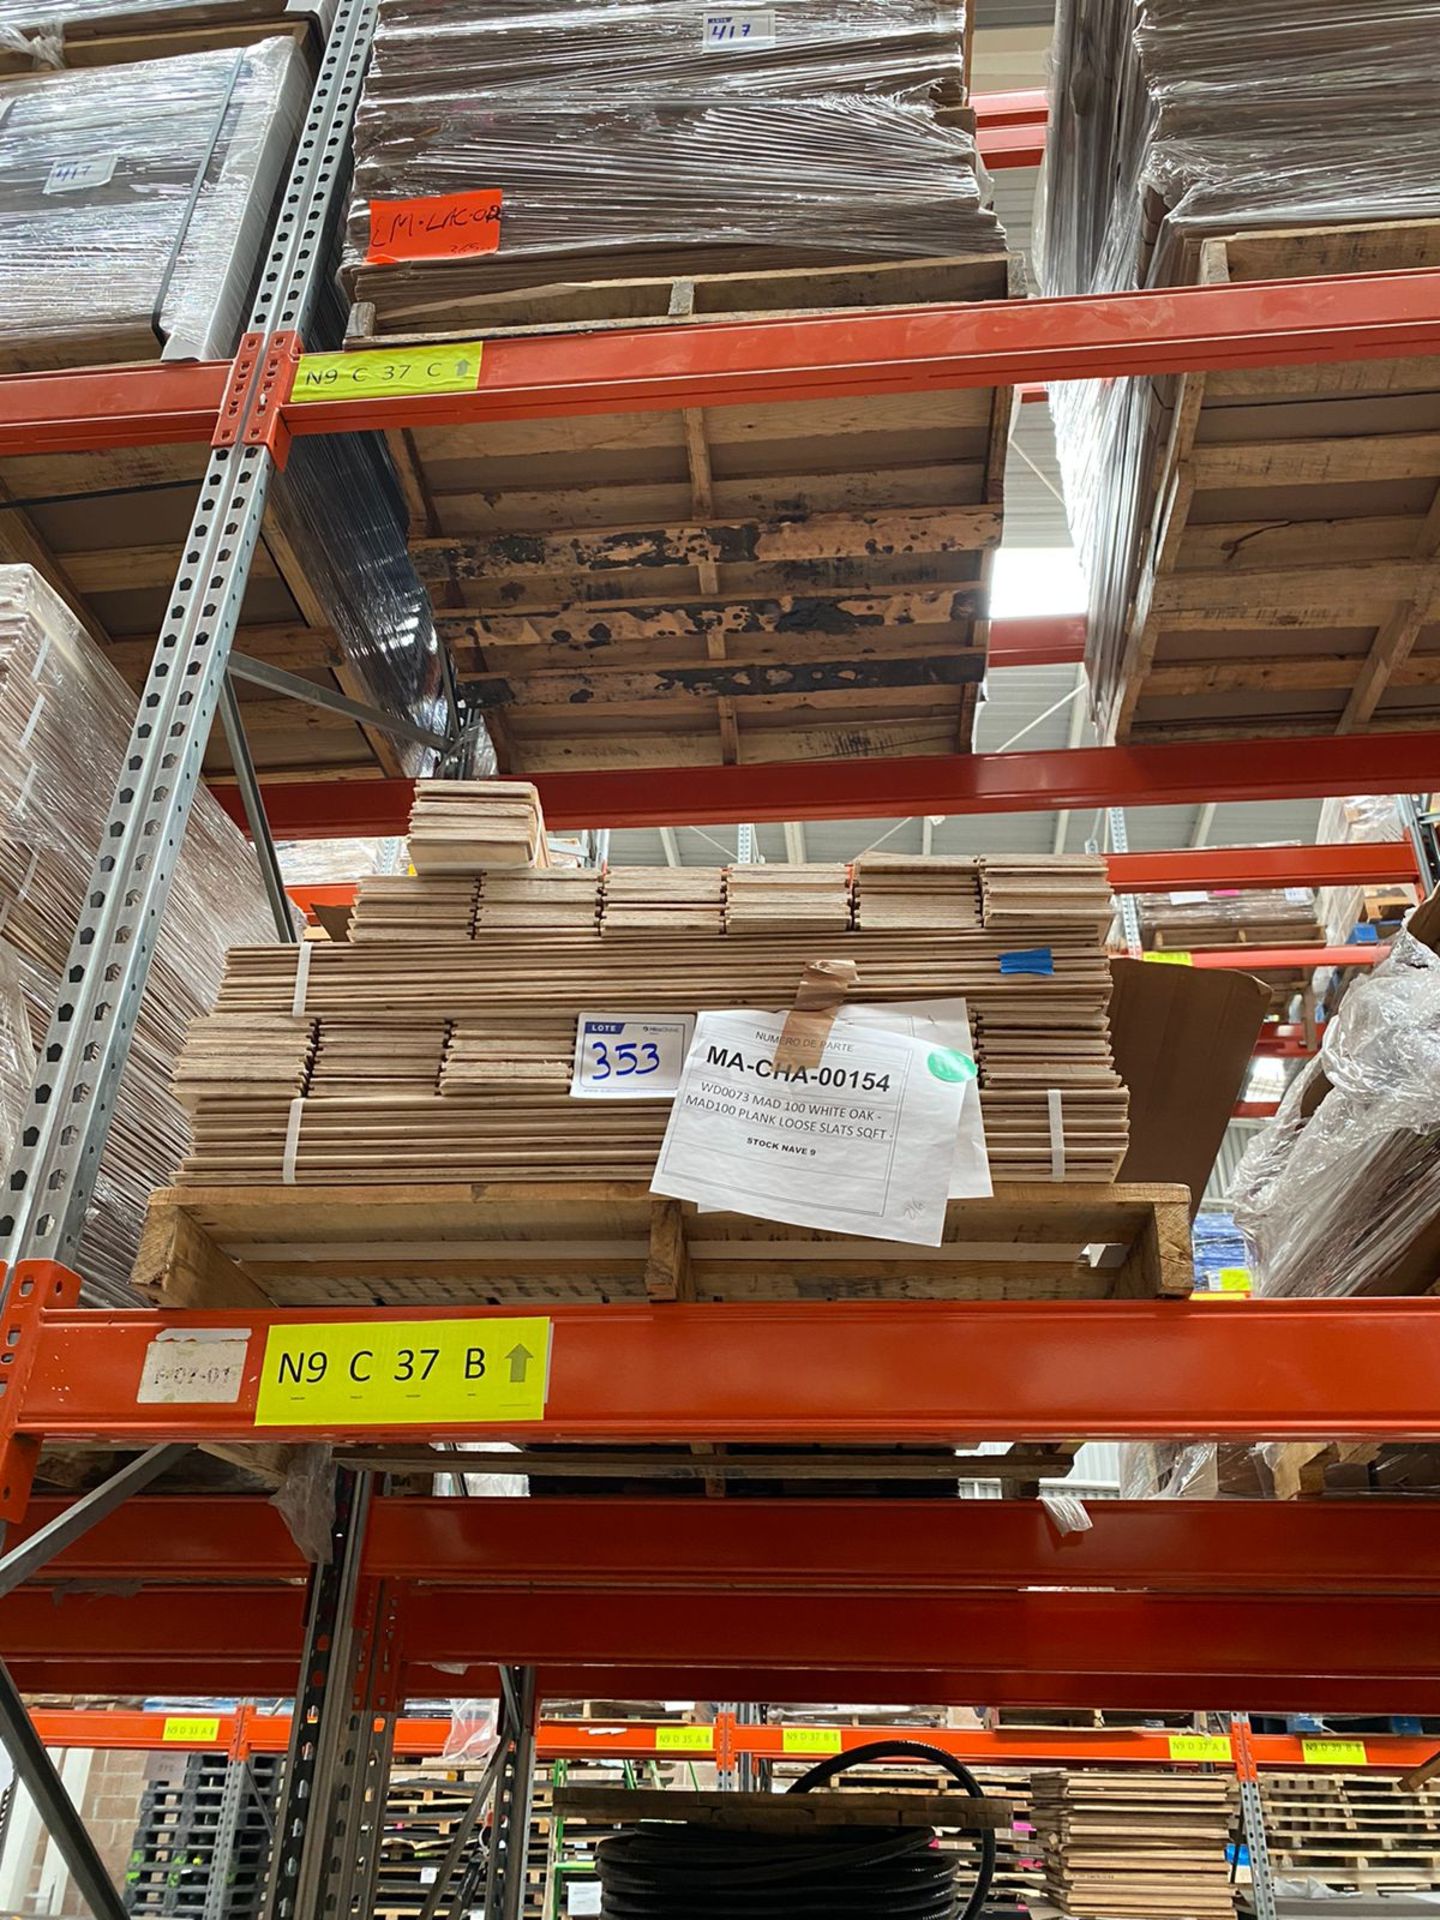 LOT OF (4,667) PCS OF ALUMINUM SHEET AND WOOD BOARDS - Image 19 of 22